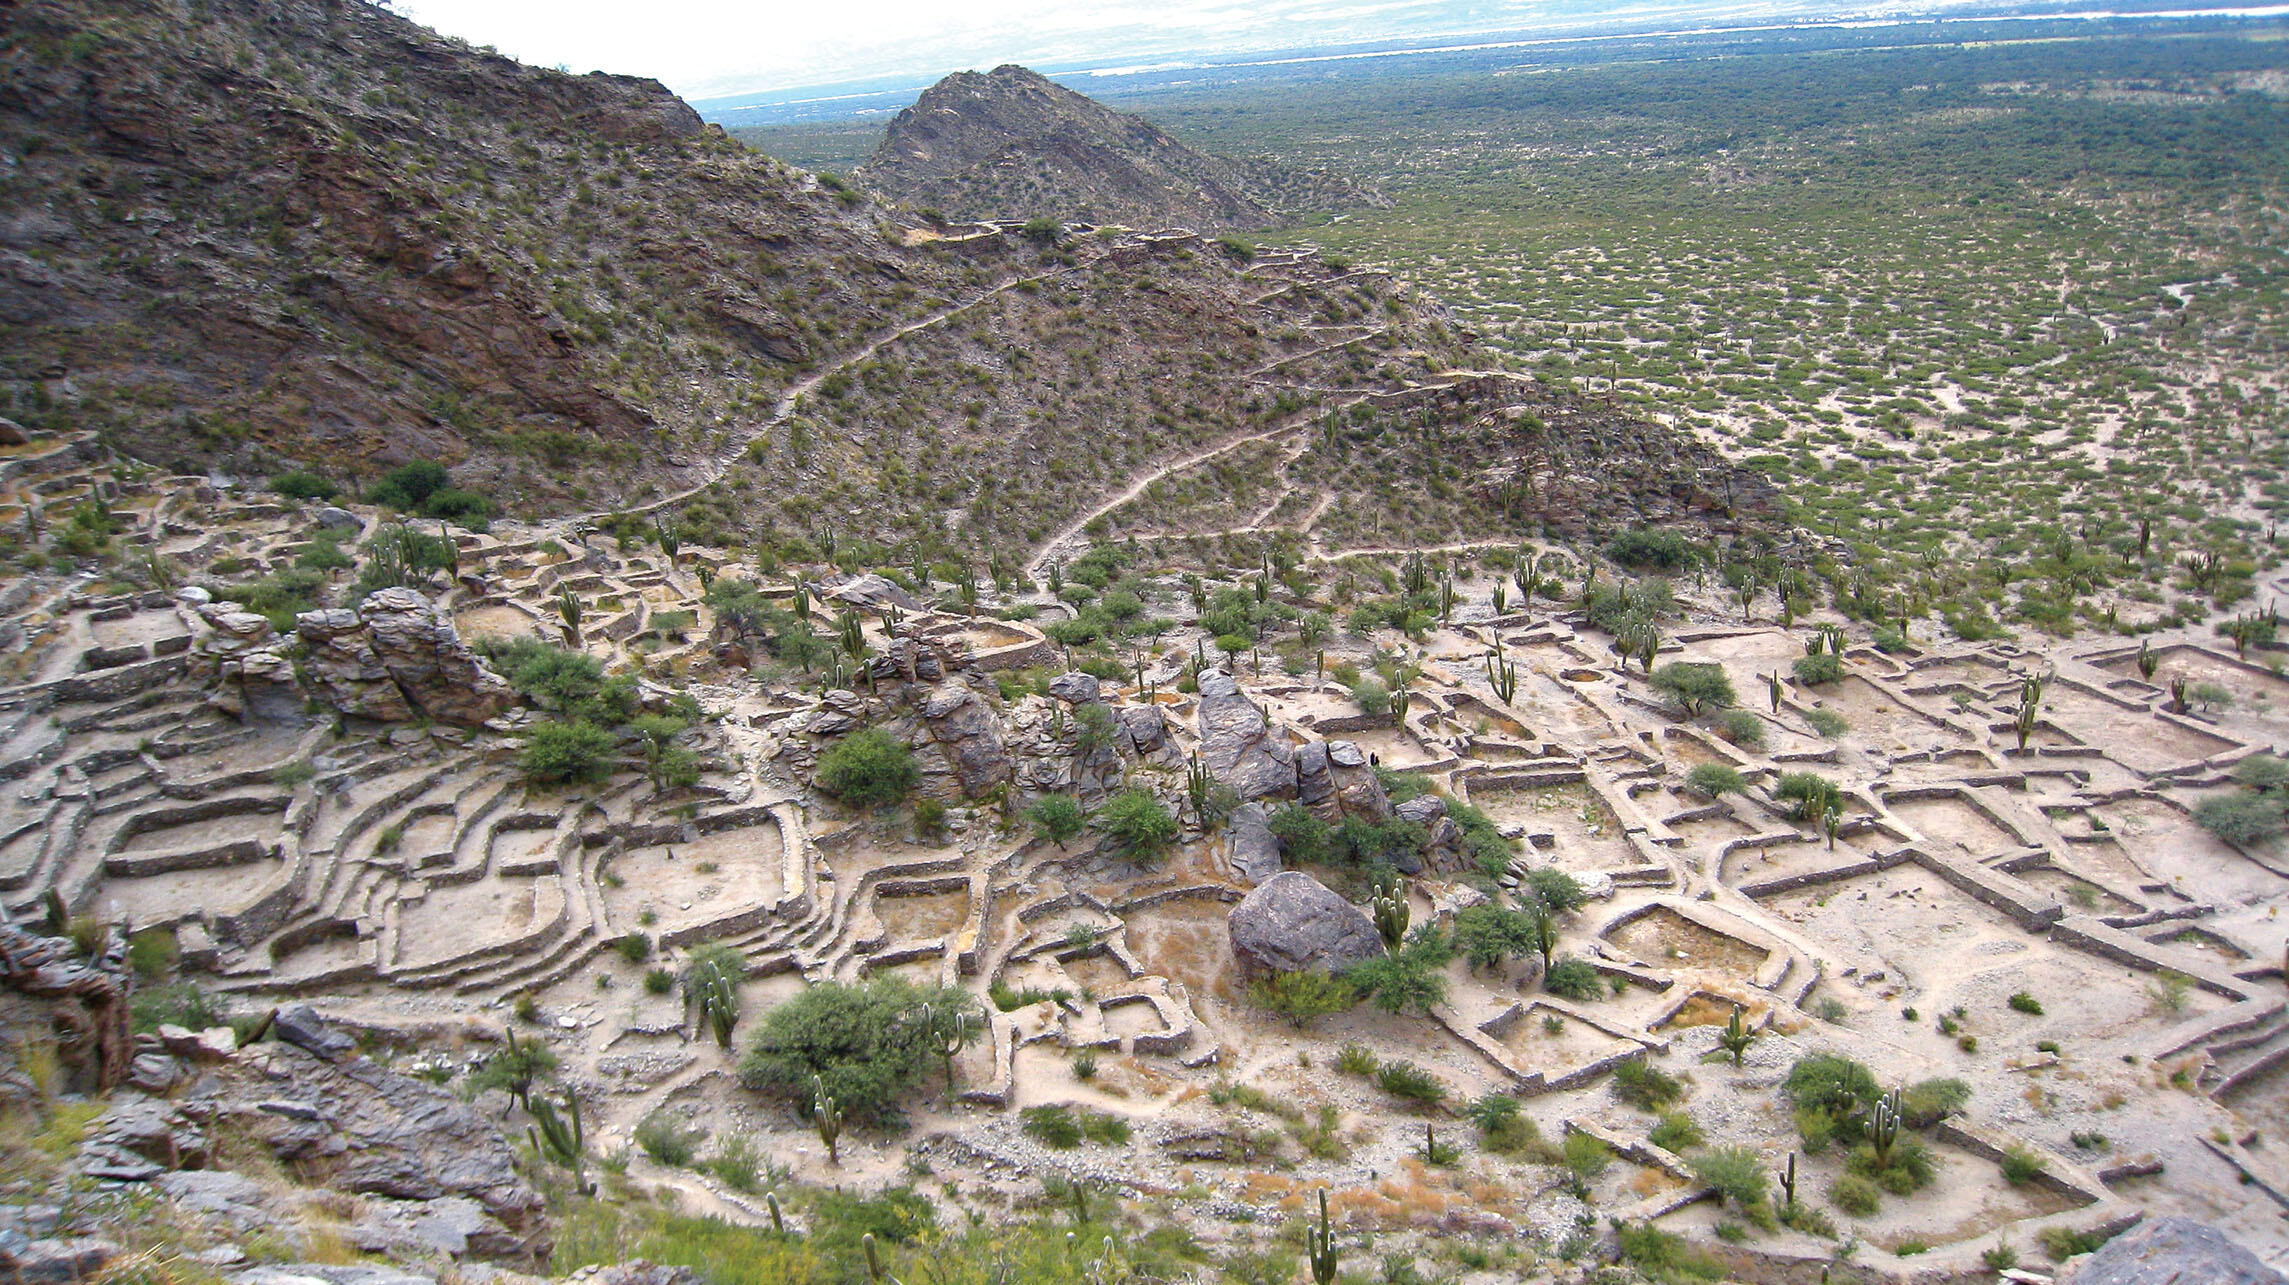 The Quilmes ruins terraced into a hillside in Tucumán,  Argentina. (Photo by Alicia Nijdam-Jones.)